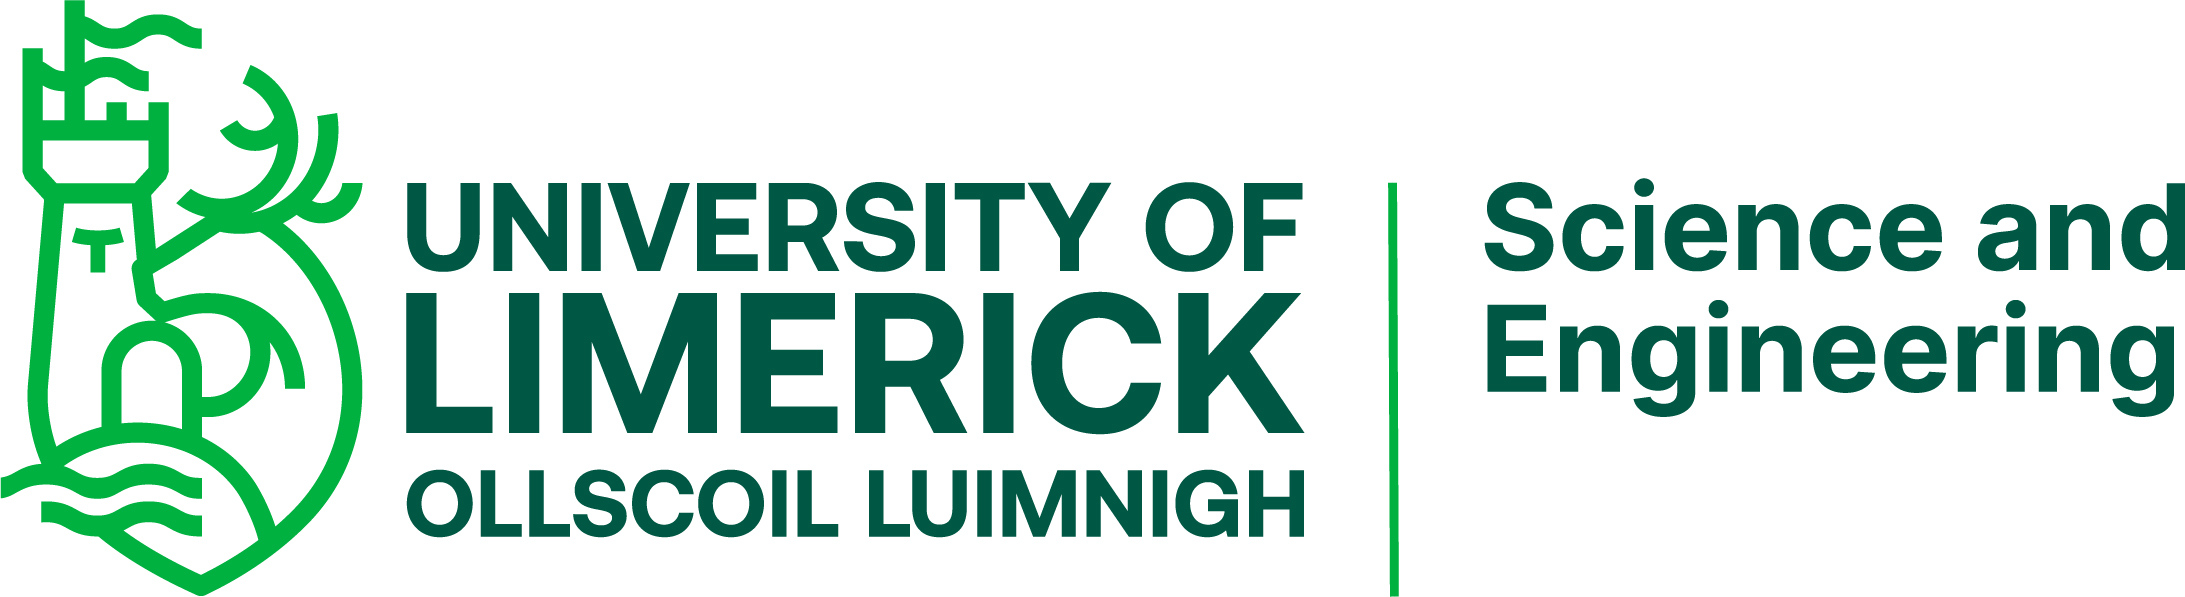 Faculty of Science and Engineering UL logo